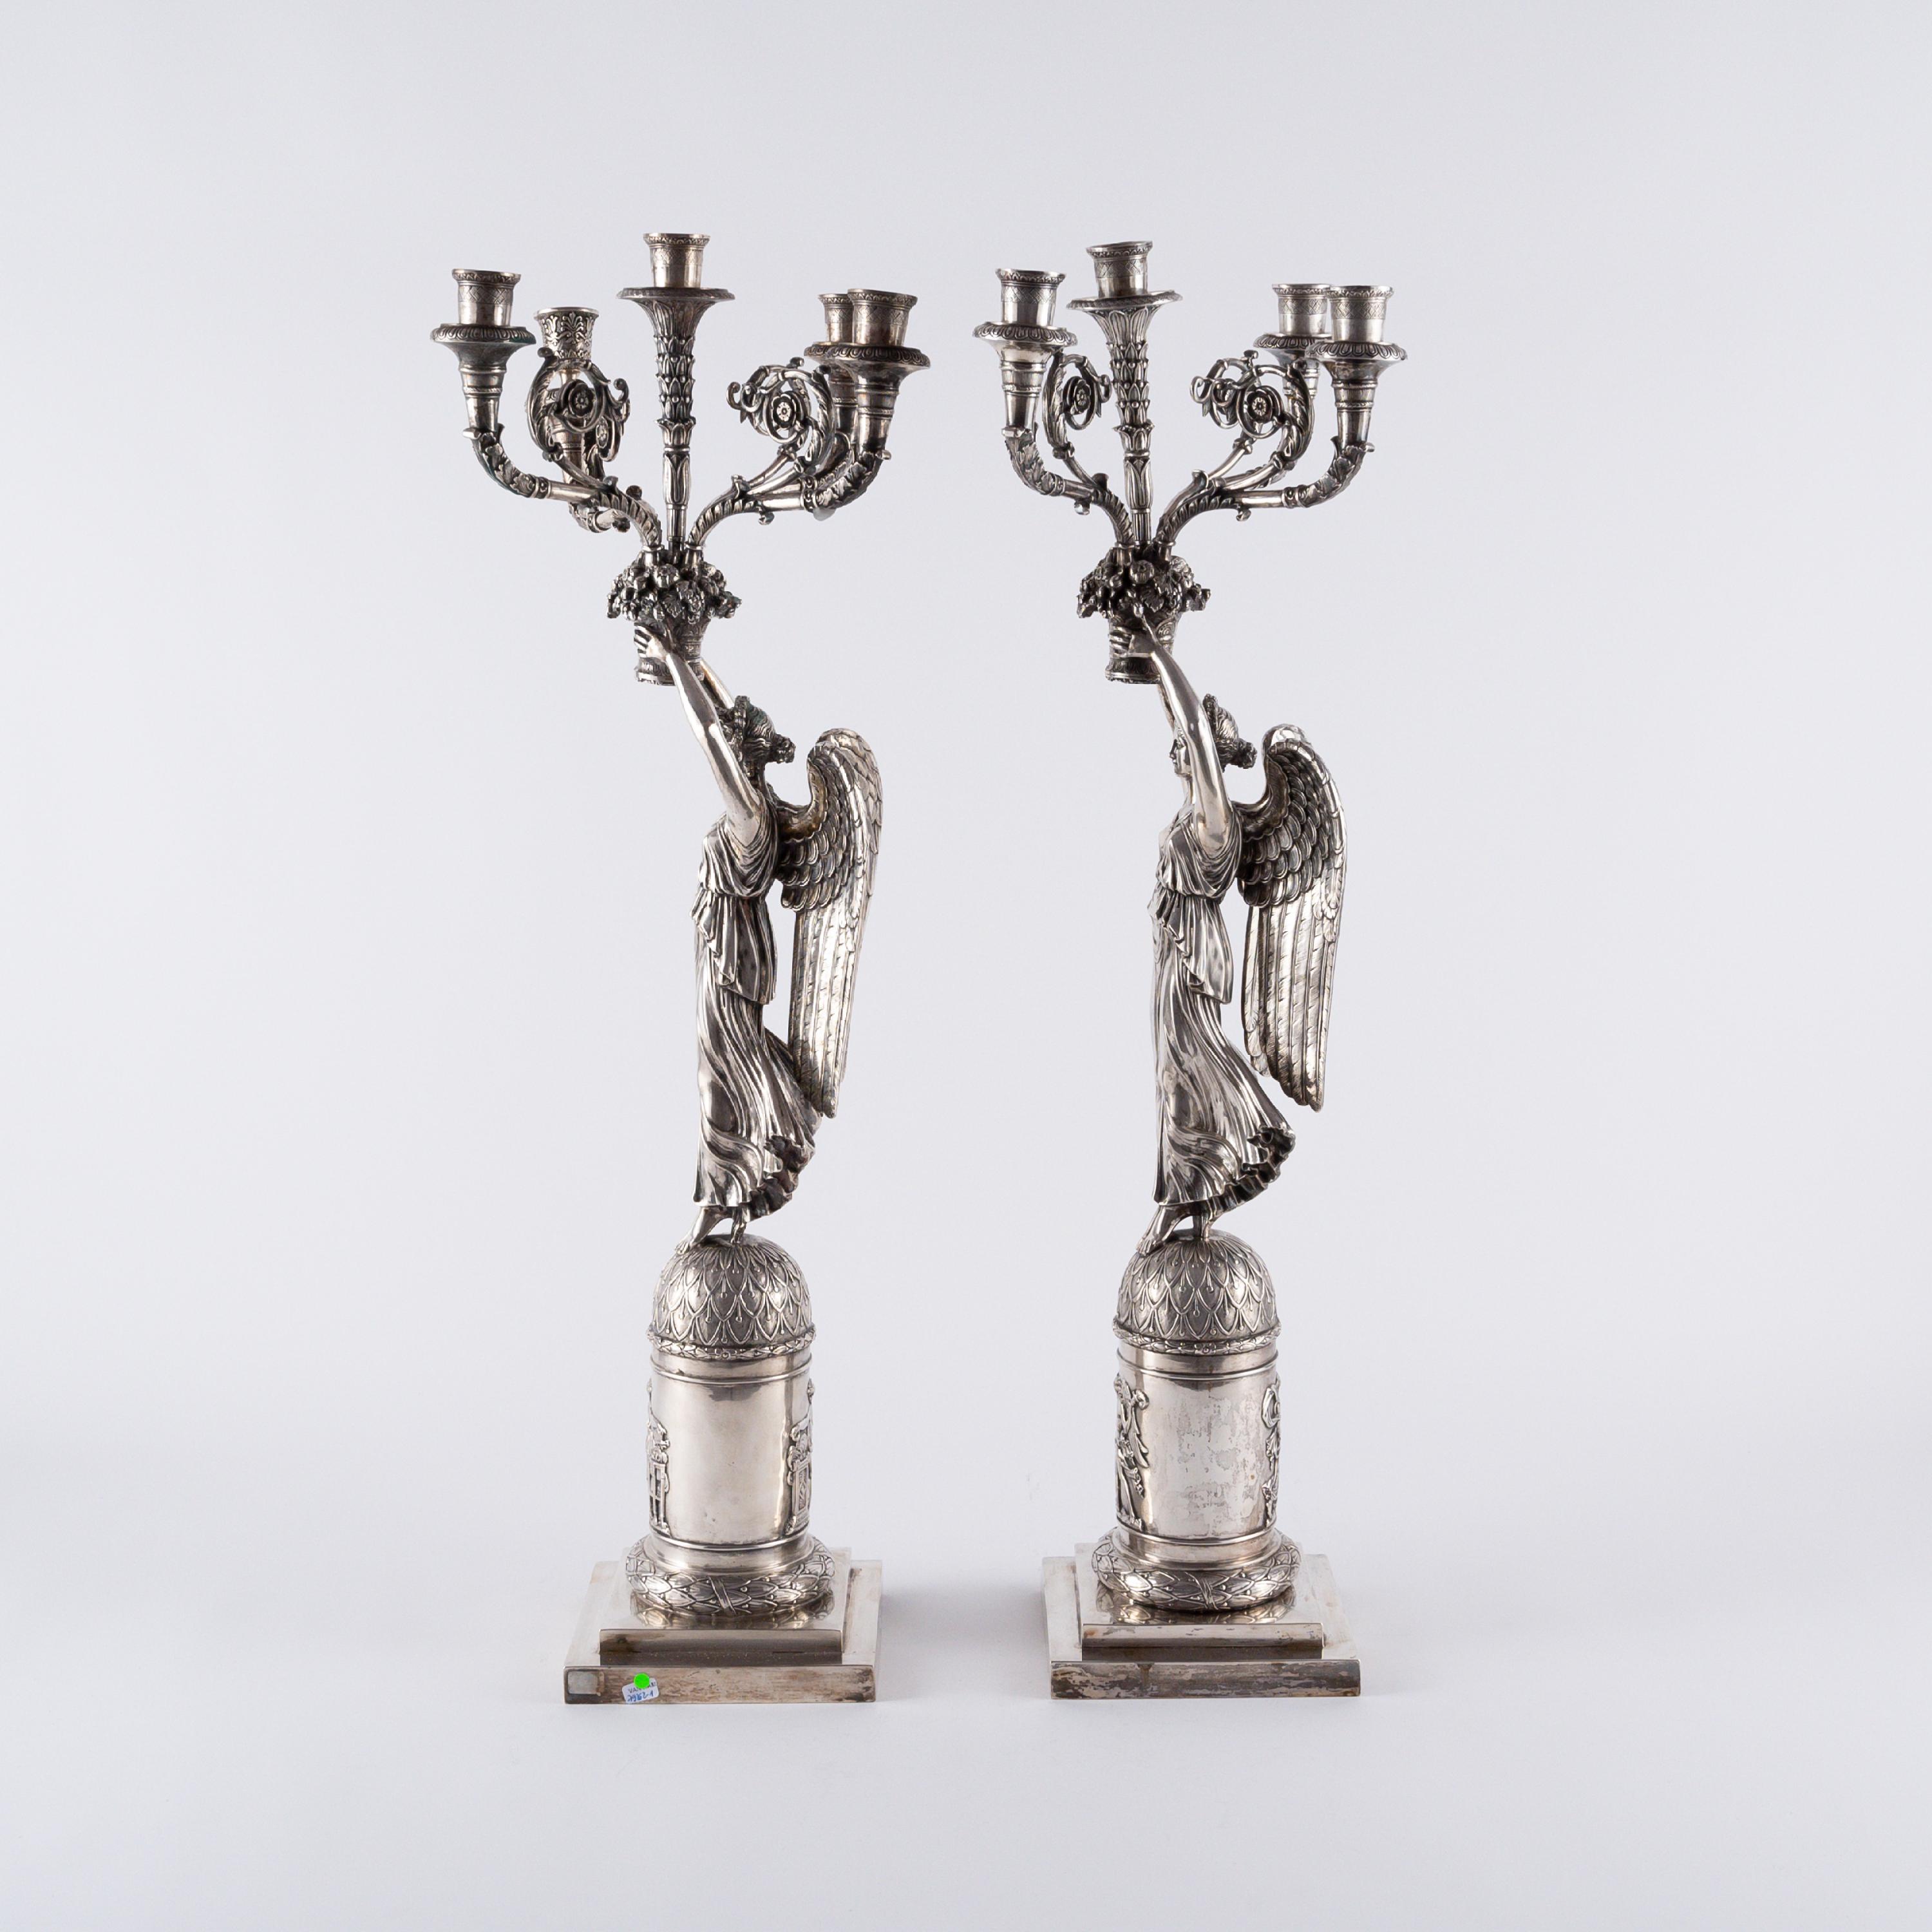 COUPLE OF EXCEPTIONAL SILVER GIRNANDOLES WITH VICTORIAN STYLE EMPIRE - Image 3 of 8